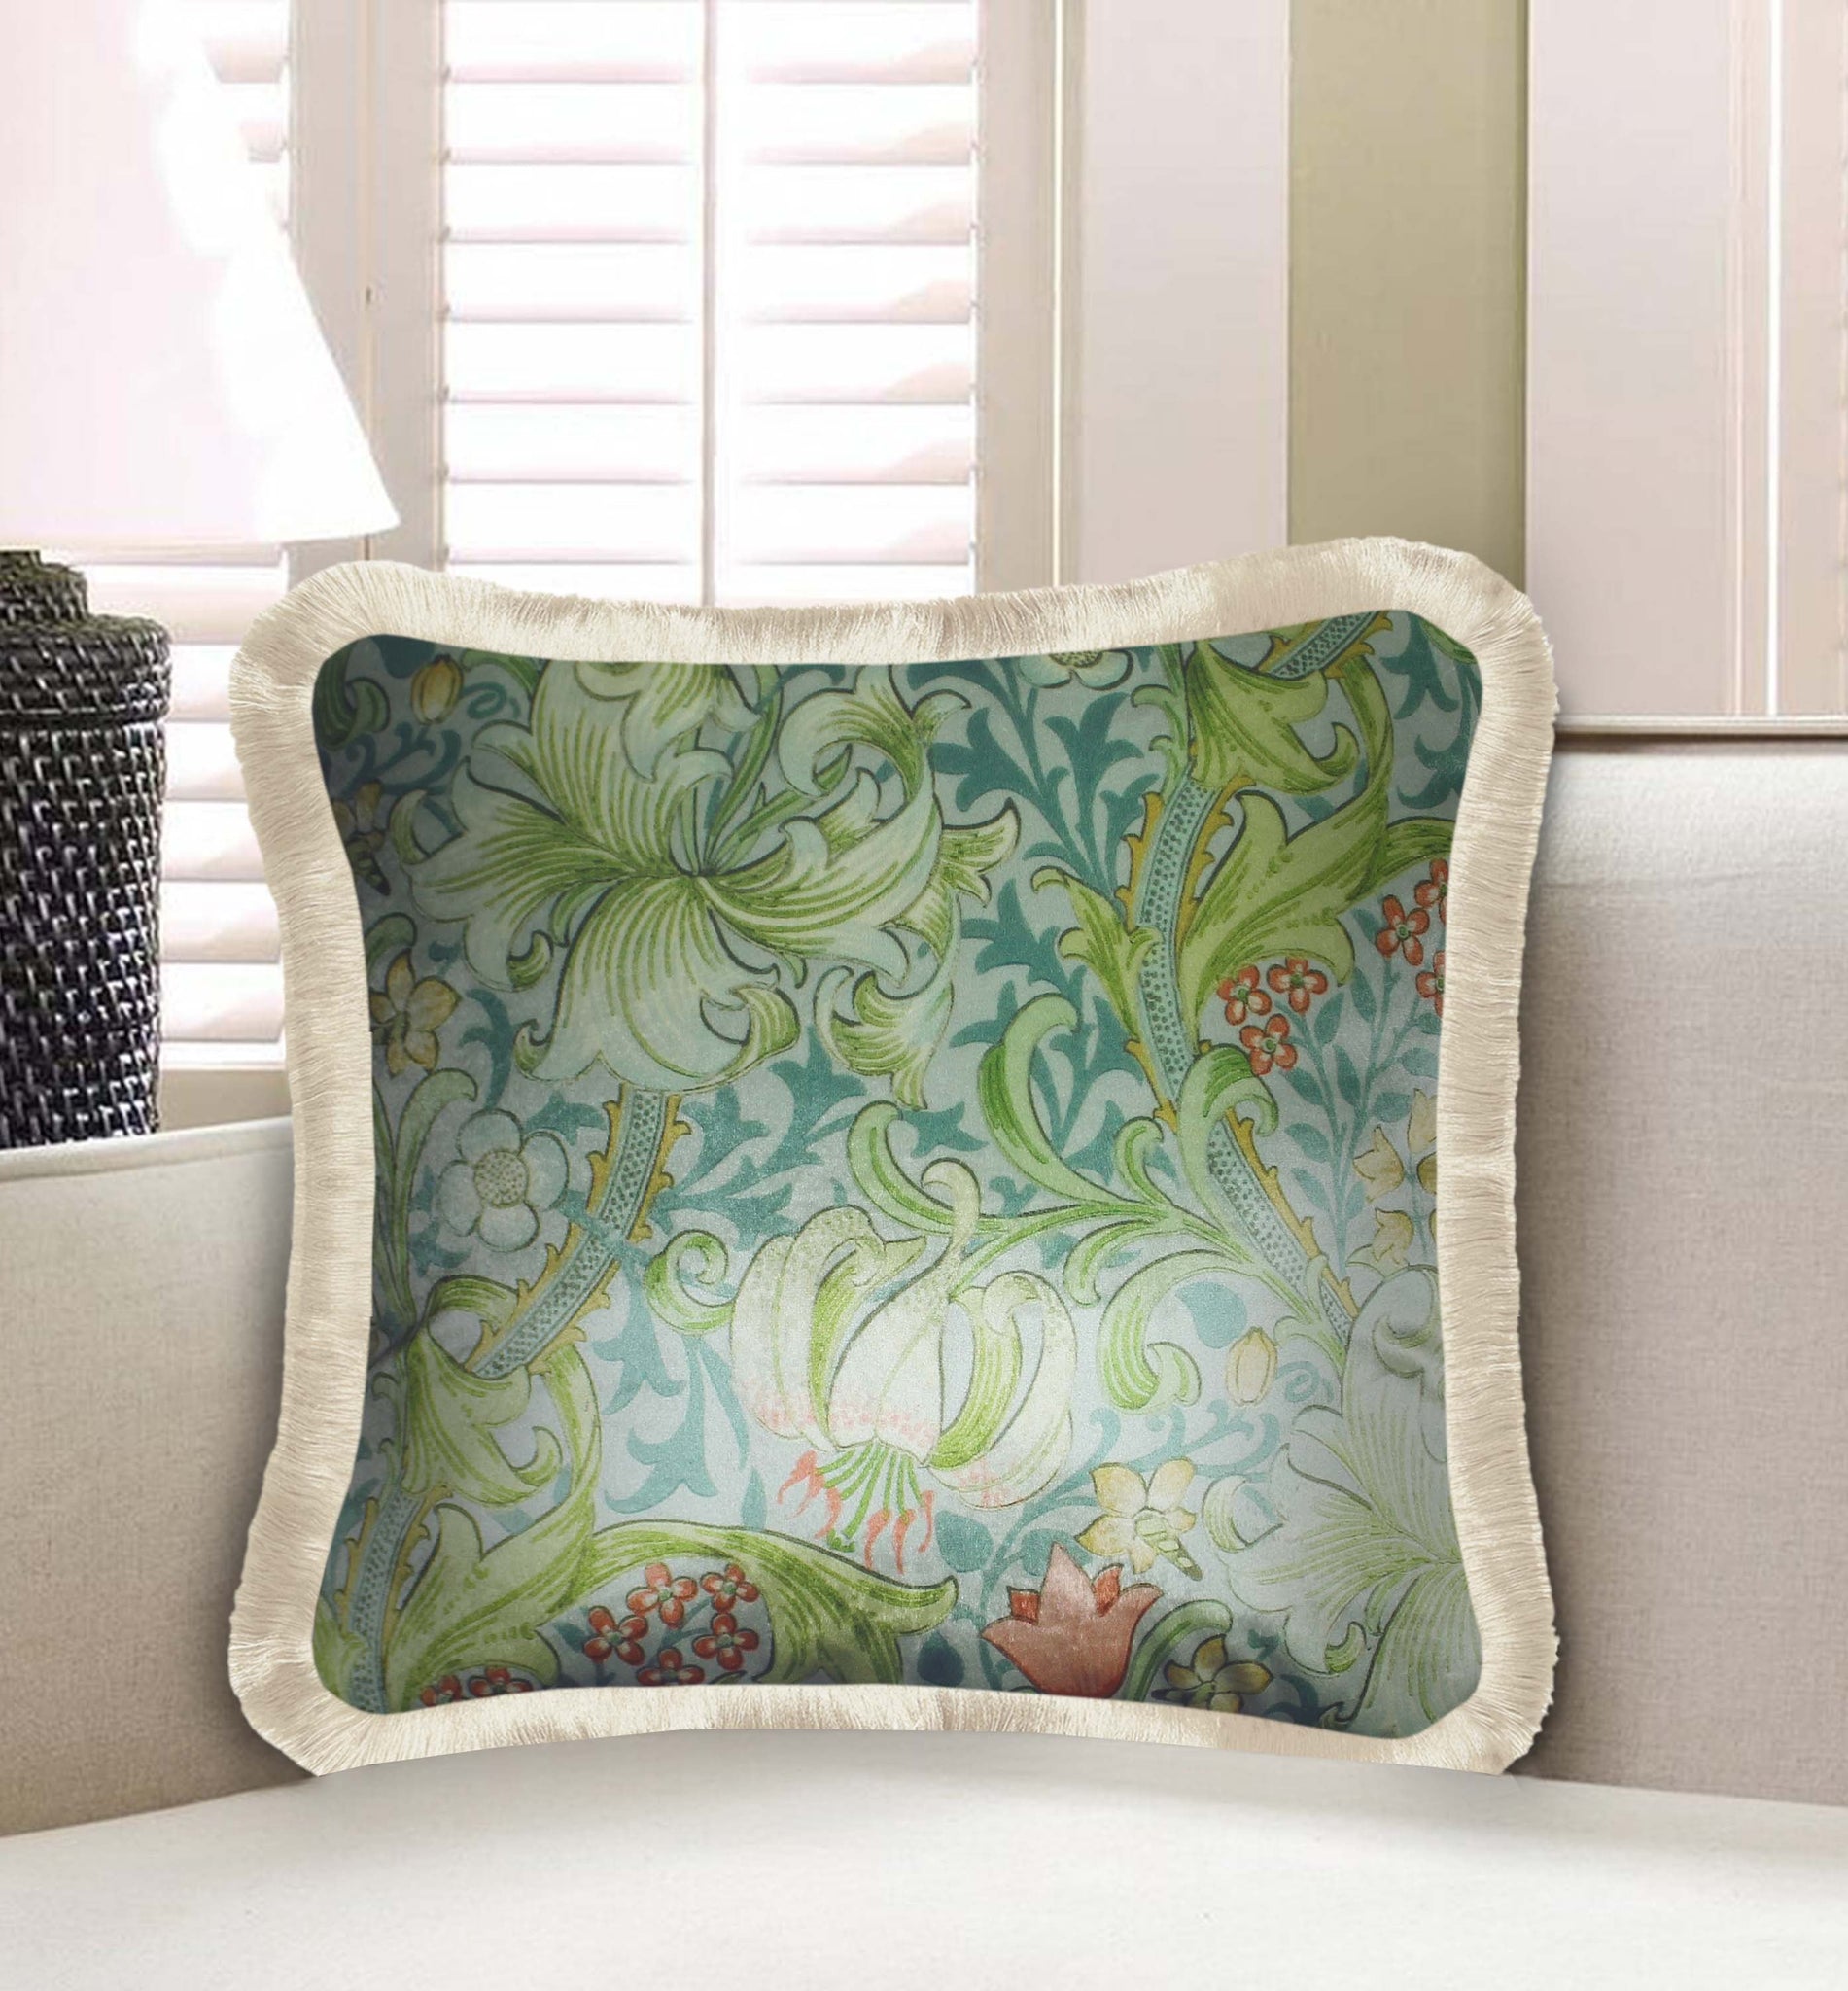 Green Velvet Cushion Cover William Morris Floral Decorative Pillowcase Vintage Home Décor Throw Pillow for Sofa Chair Couch Bedroom 45x45 cm 18x18 In